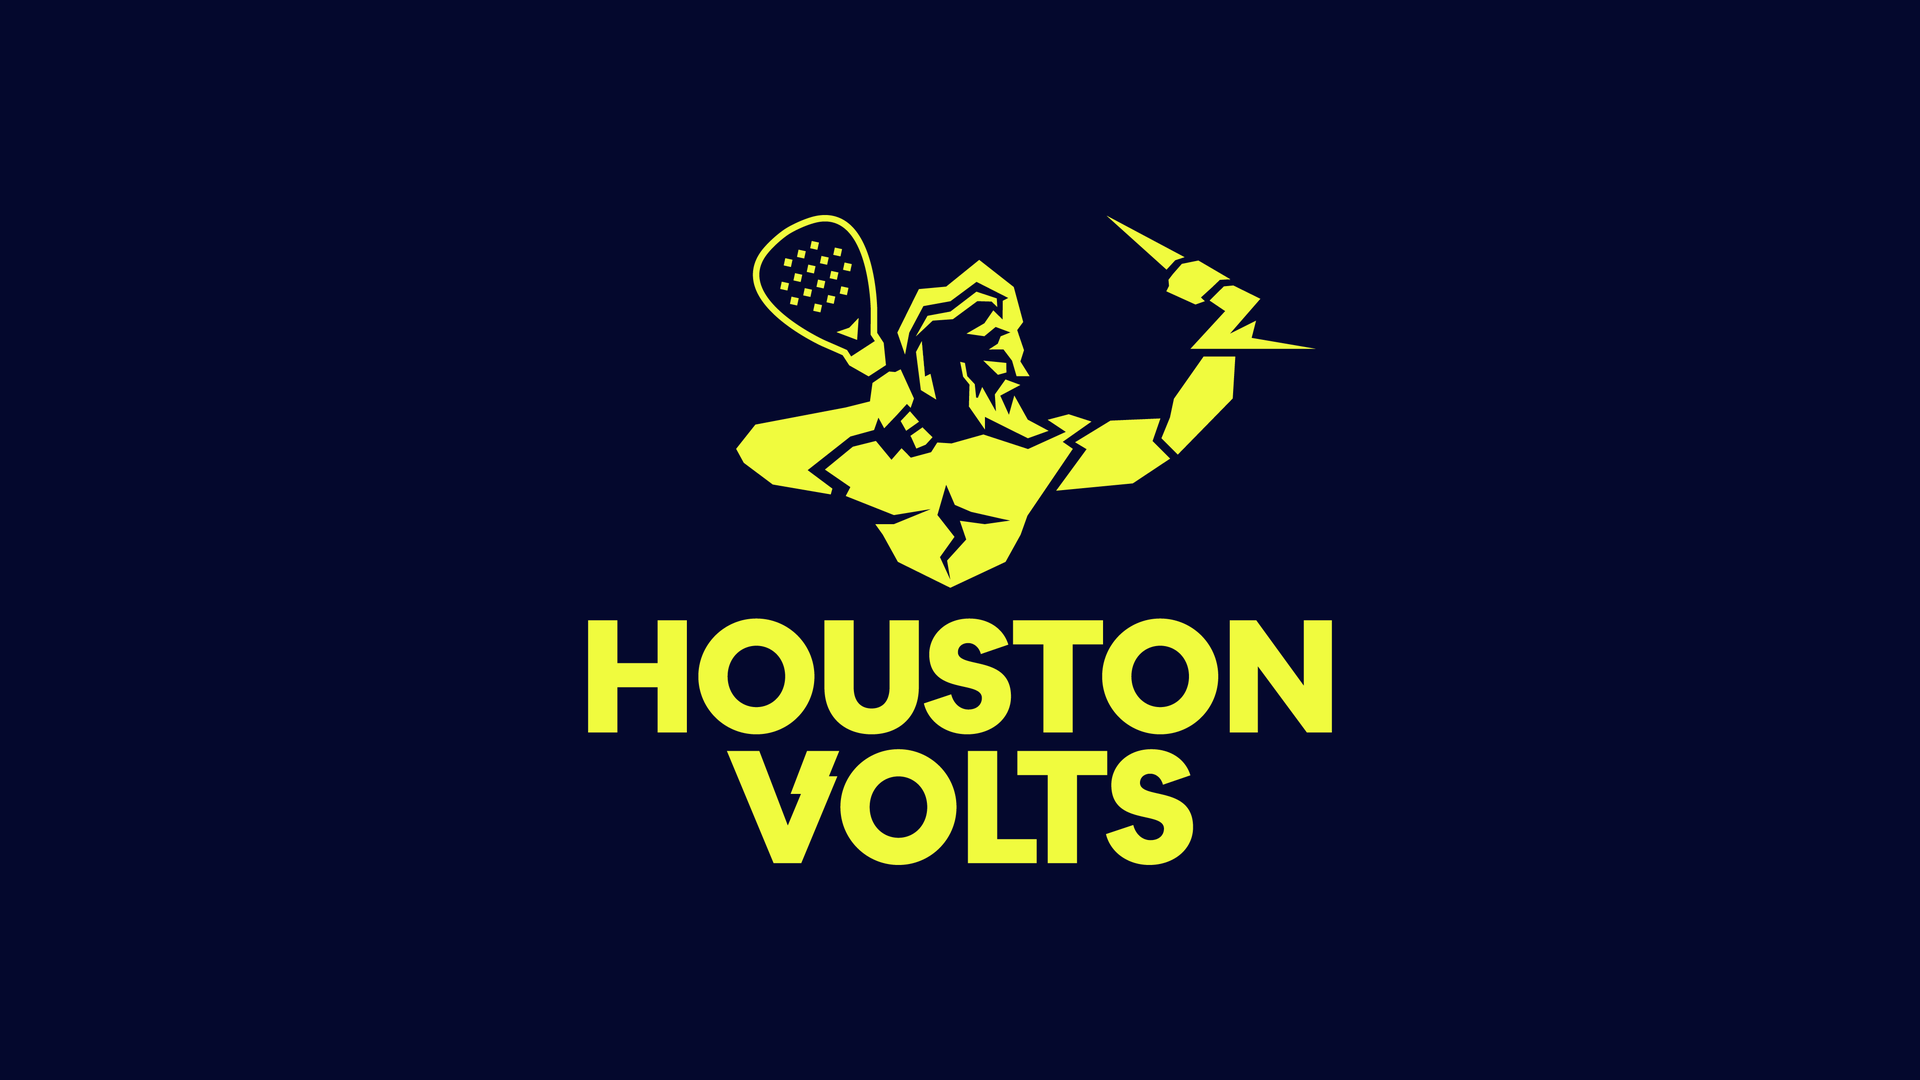 A logo featuring Zeus holding a lightning bolt and padel board with the words "HOUSTON VOLTS"